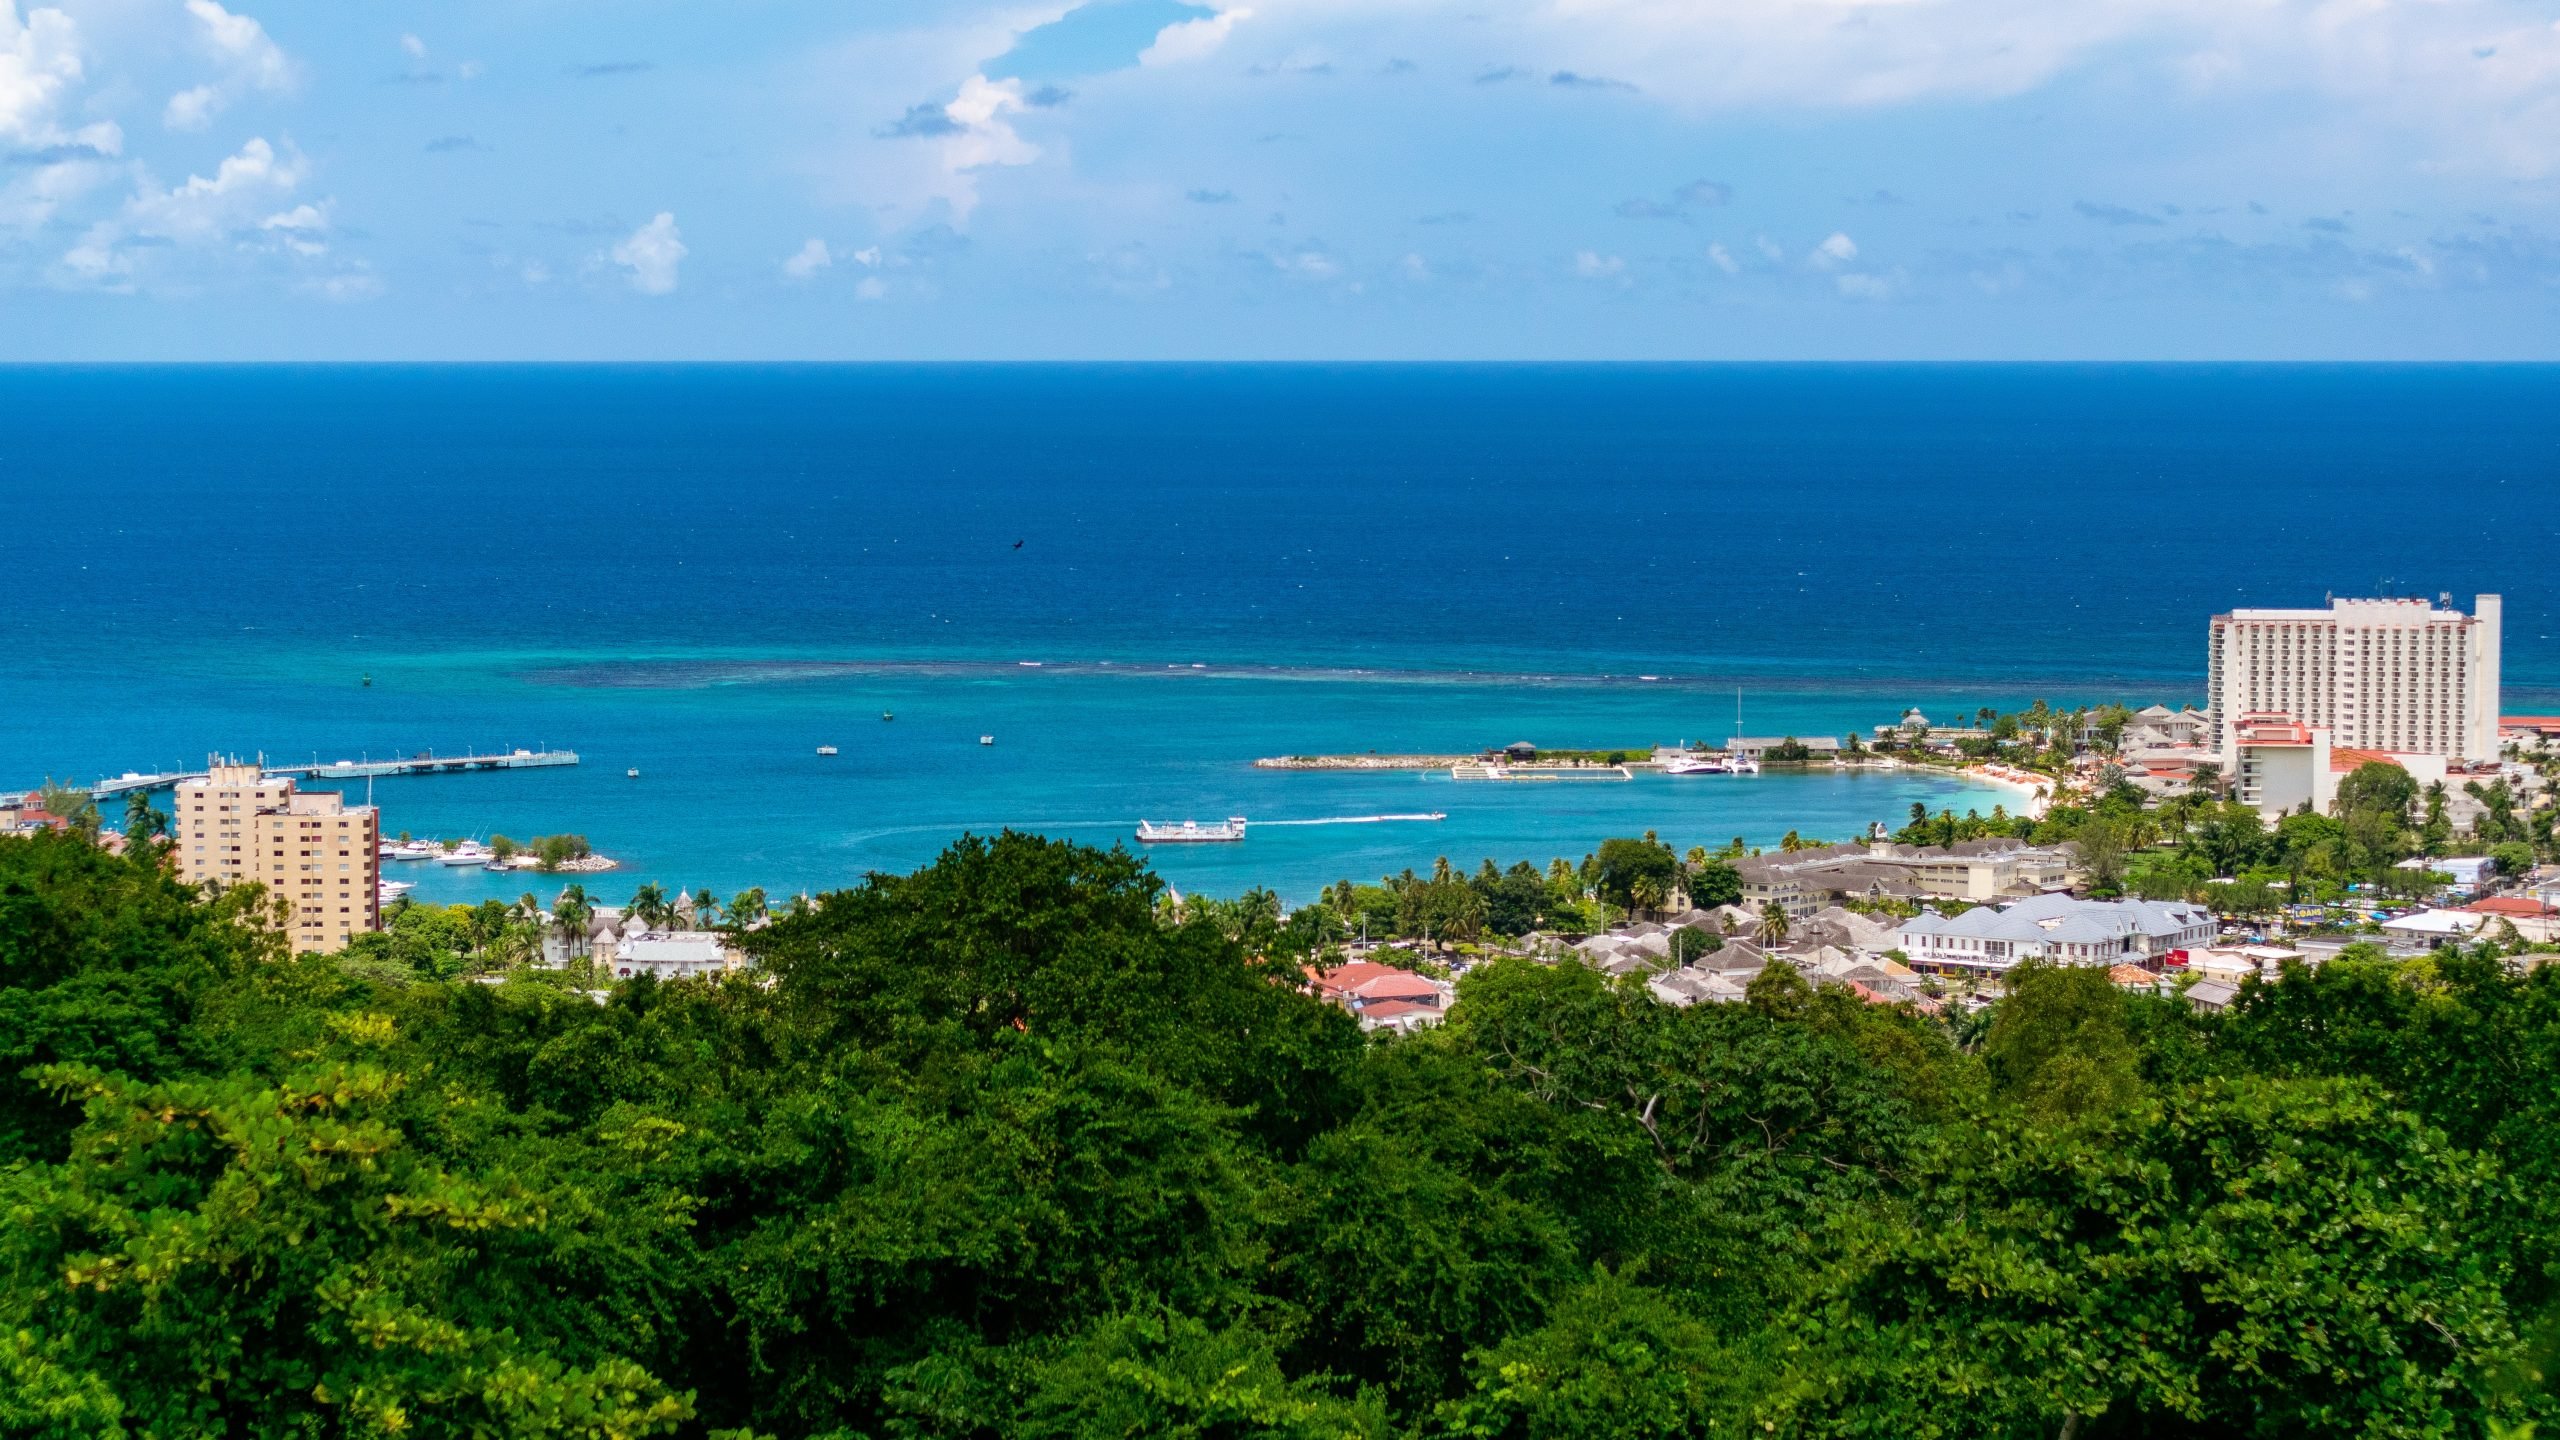 How To Get From Negril to Ocho Rios - All Possible Ways, cheapest way from Negril to Ocho Rios, Negril to Ocho Rios, Negril Bus, Negril Bus to Ocho Rios